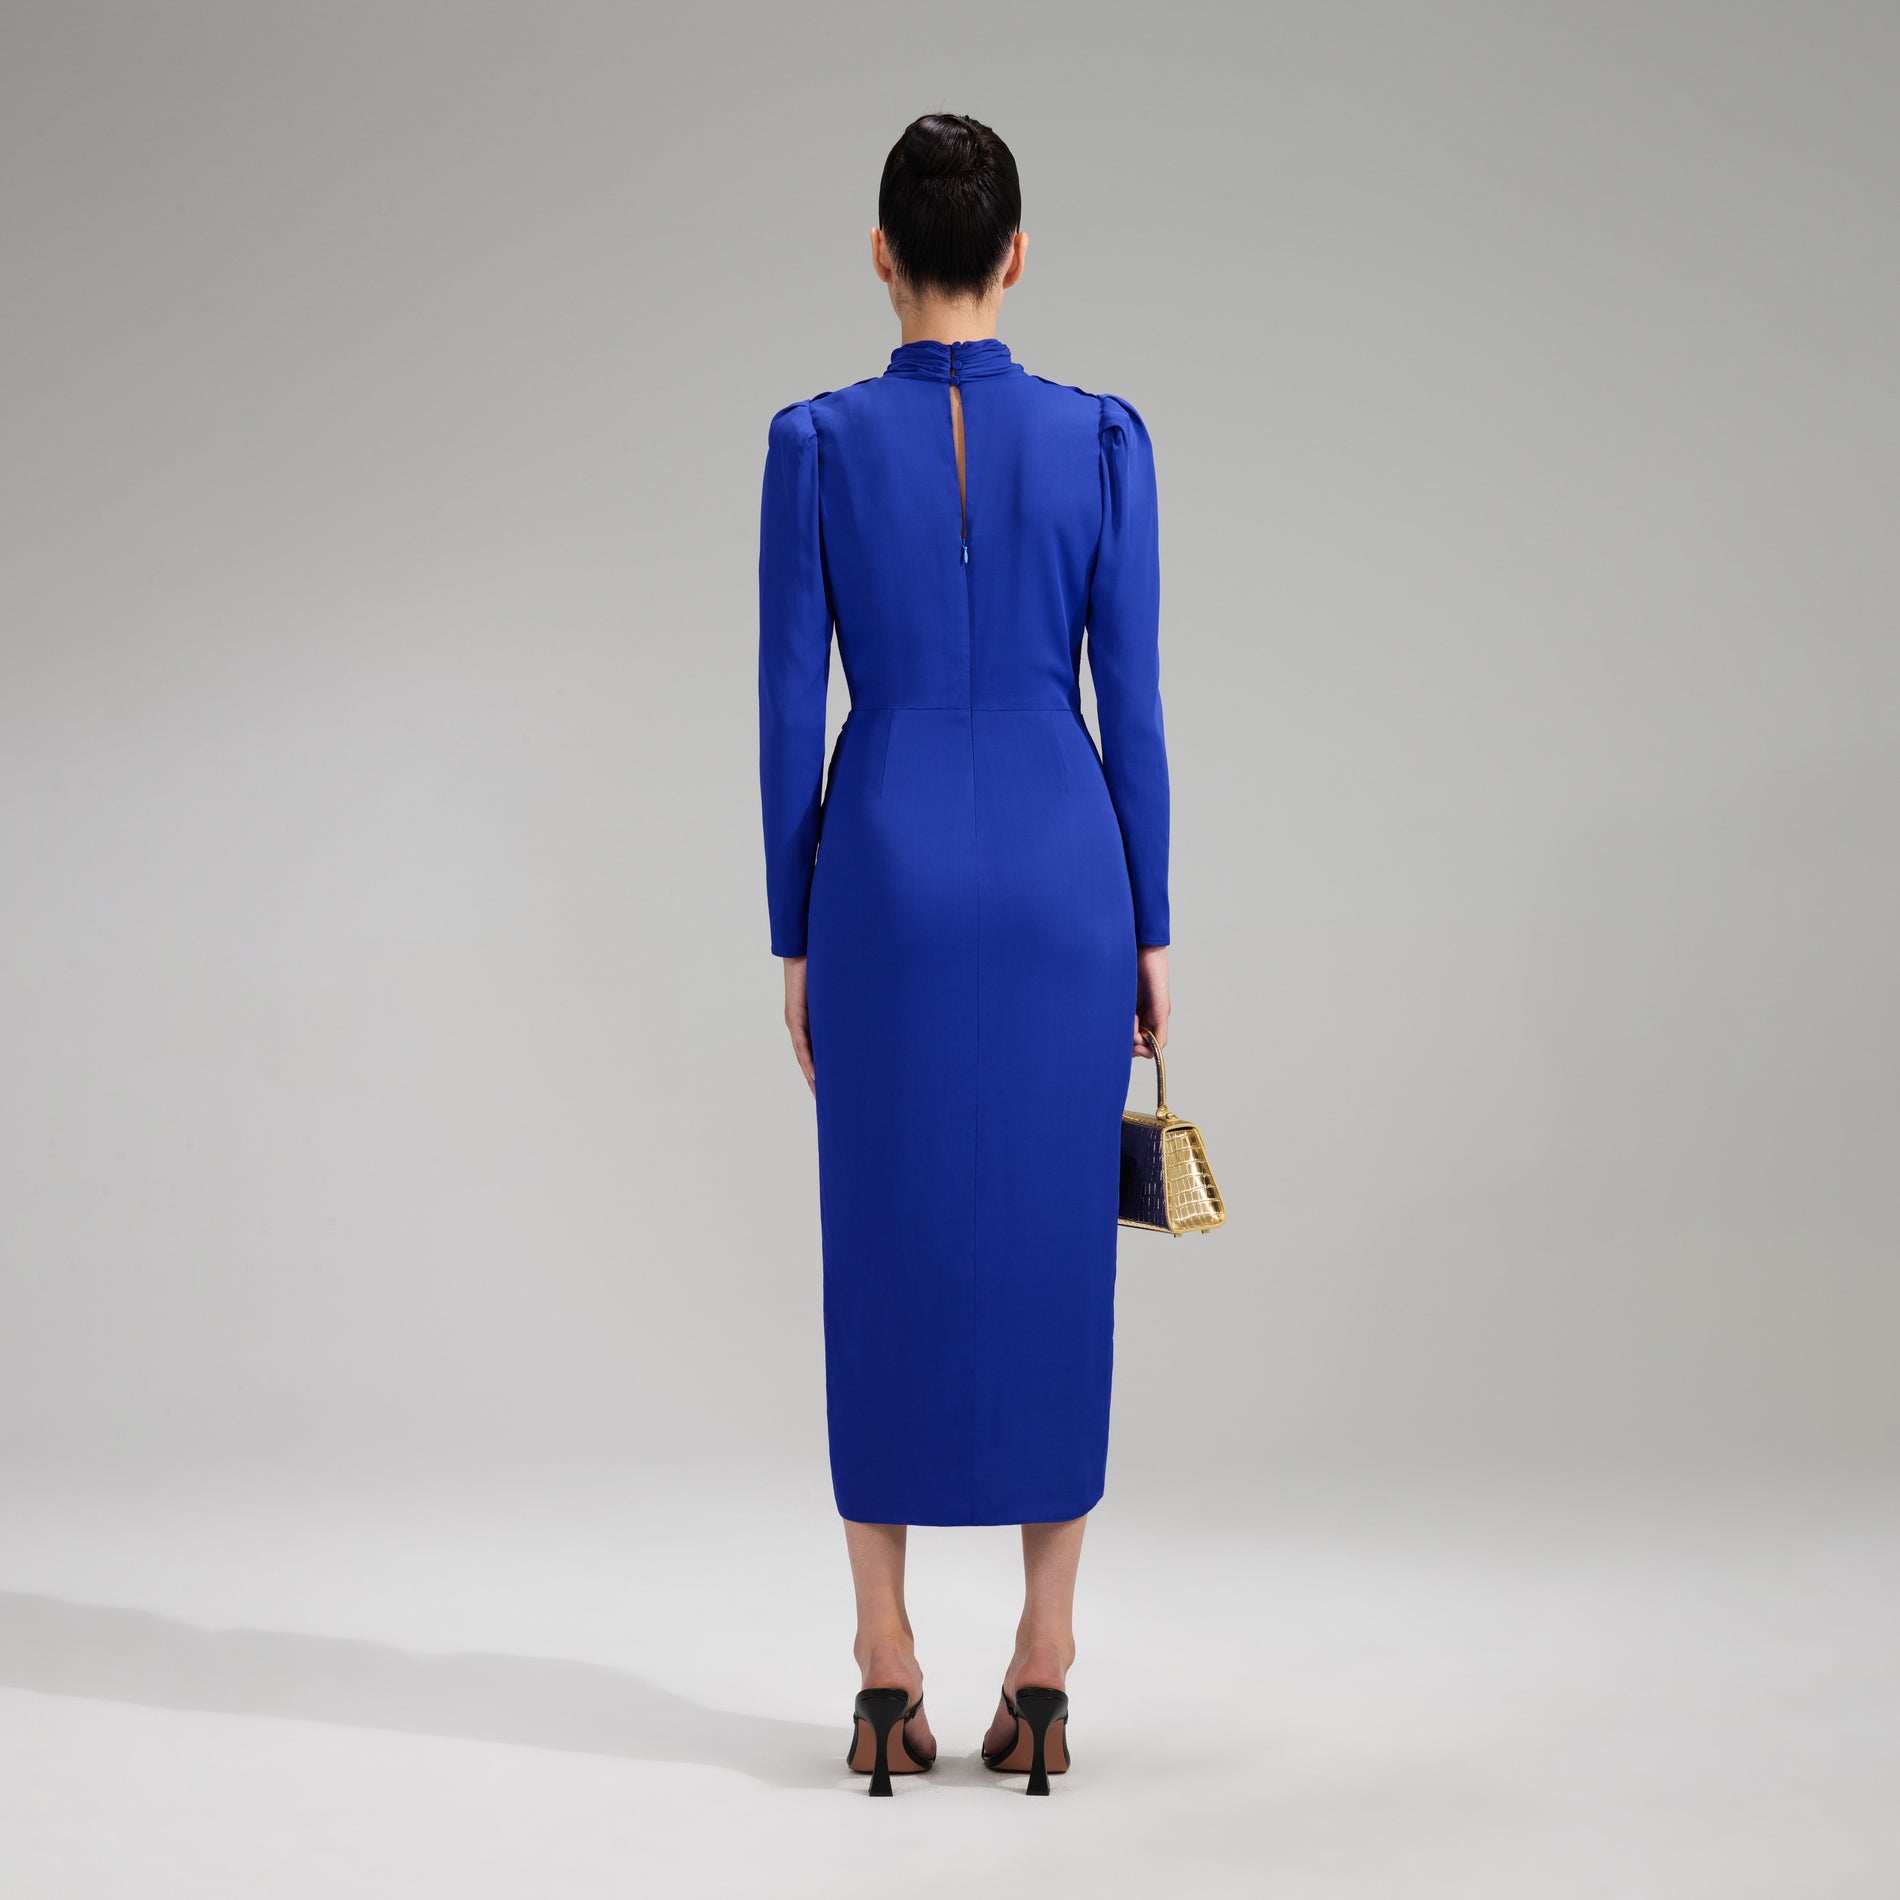 A woman wearing the Blue Stretch Crepe Twisted Collar Midi Dress